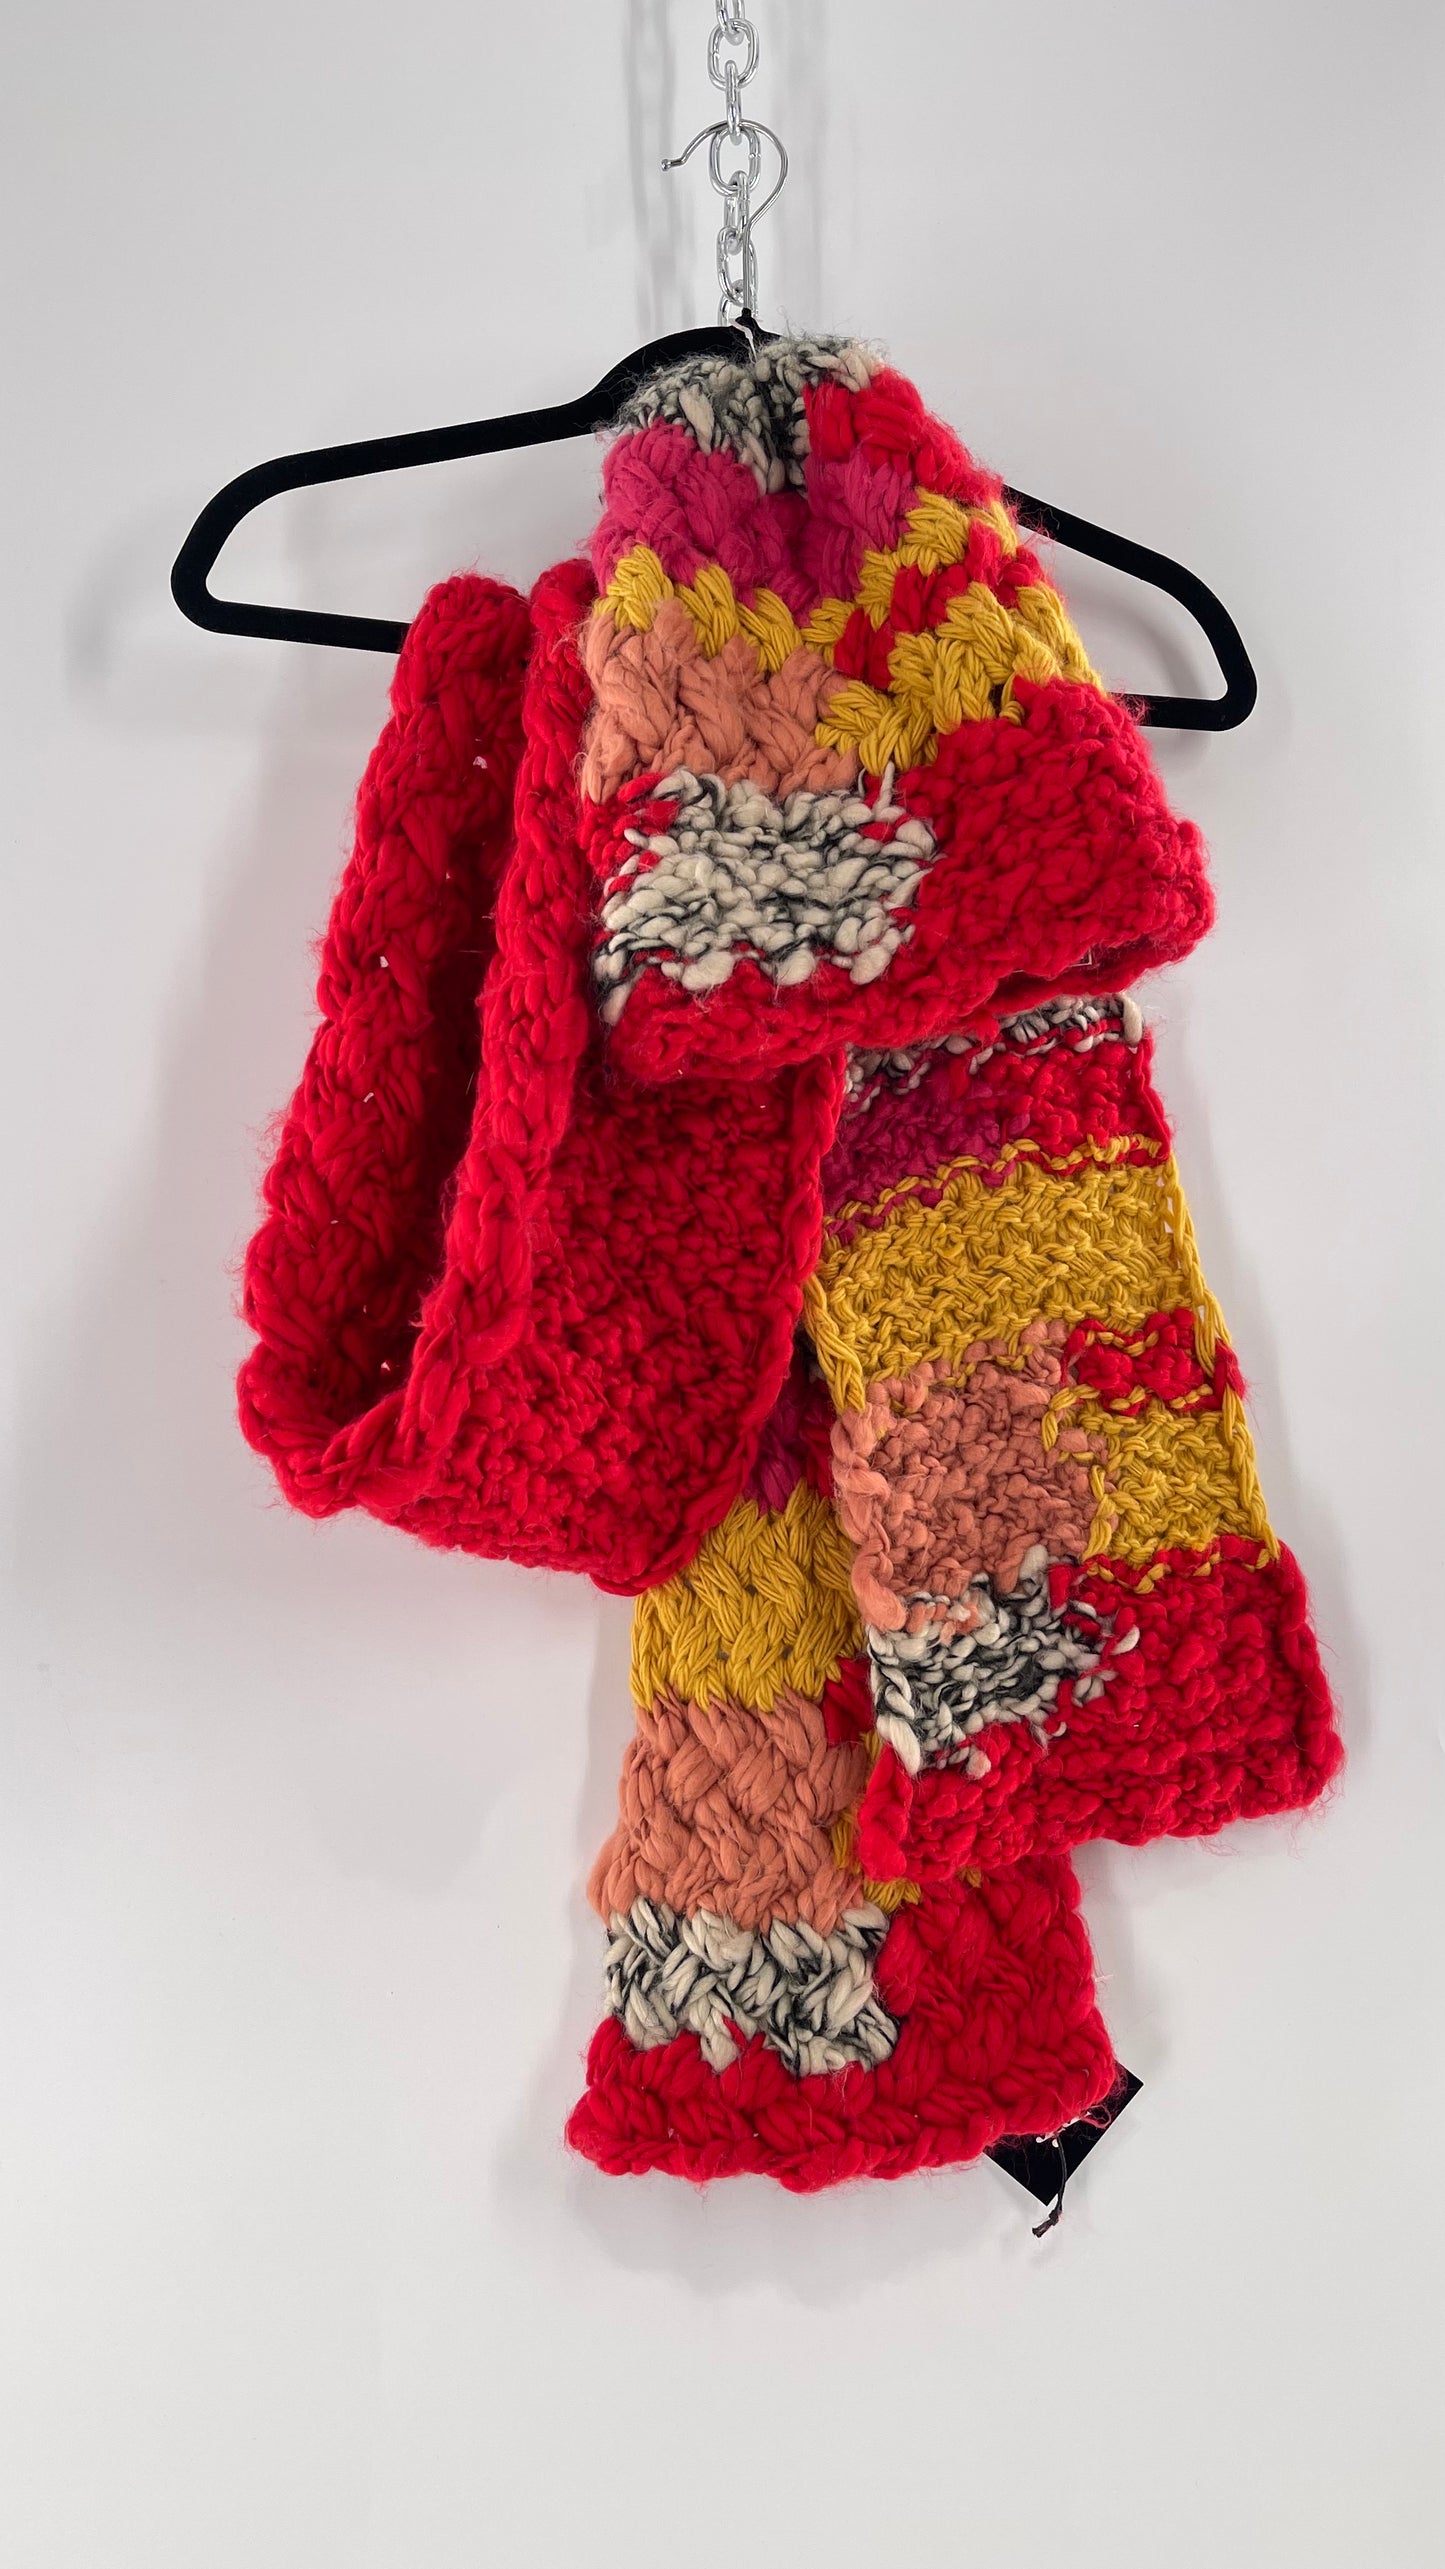 Anthropologie Hand Knit Red/Peach/Yellow Scarf and Beanie Set